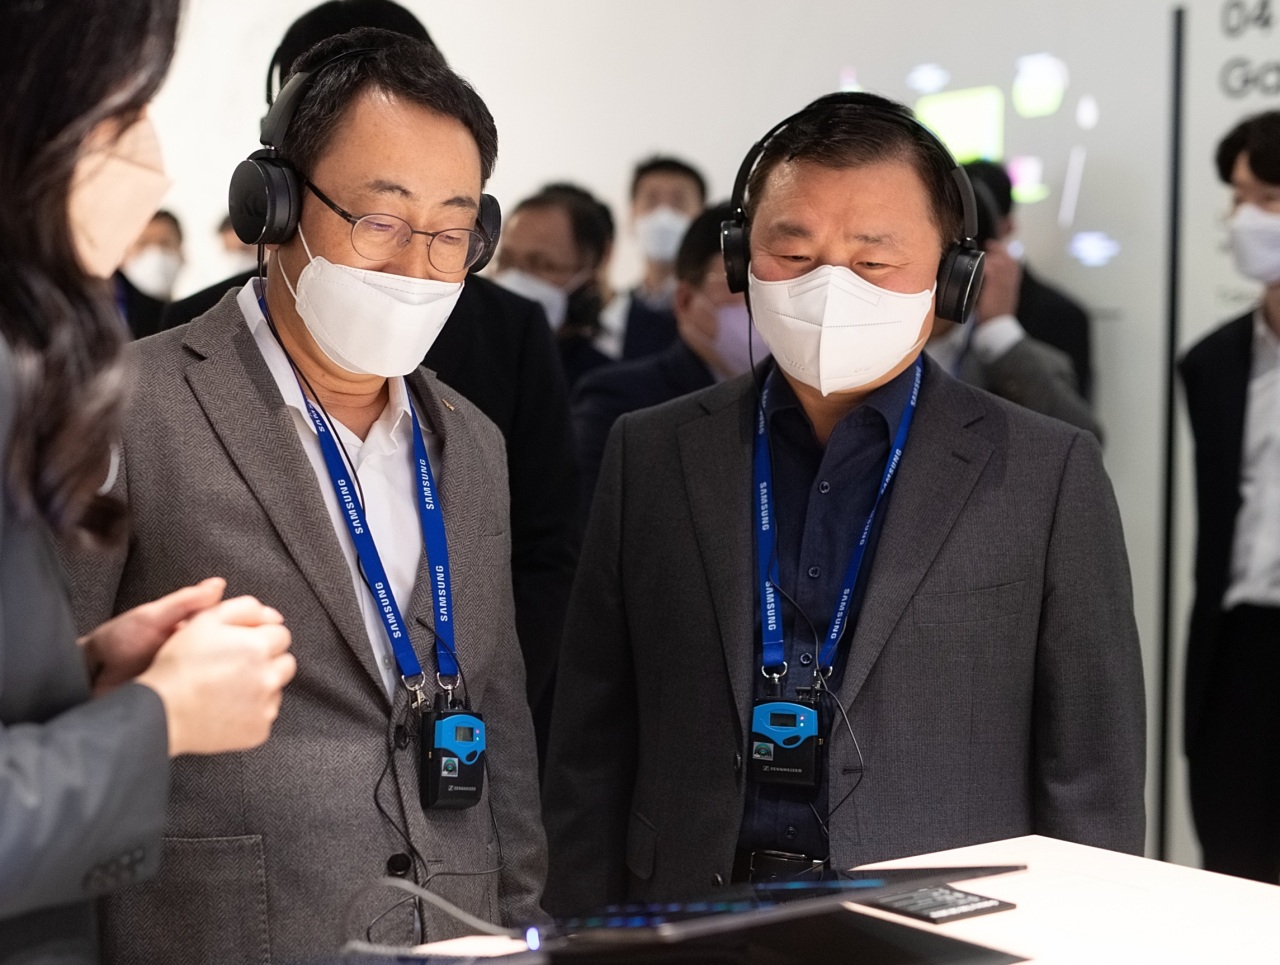 Samsung Electronics president and head of Mobile eXperience business, Roh Tae-moon, (right) and SK Telecom Chief Executive Officer Ryu Young-sang are seen during a tour of Samsung’s exhibition at MWC 2022 in Barcelona, Spain, Monday. (Join Press Corps.)